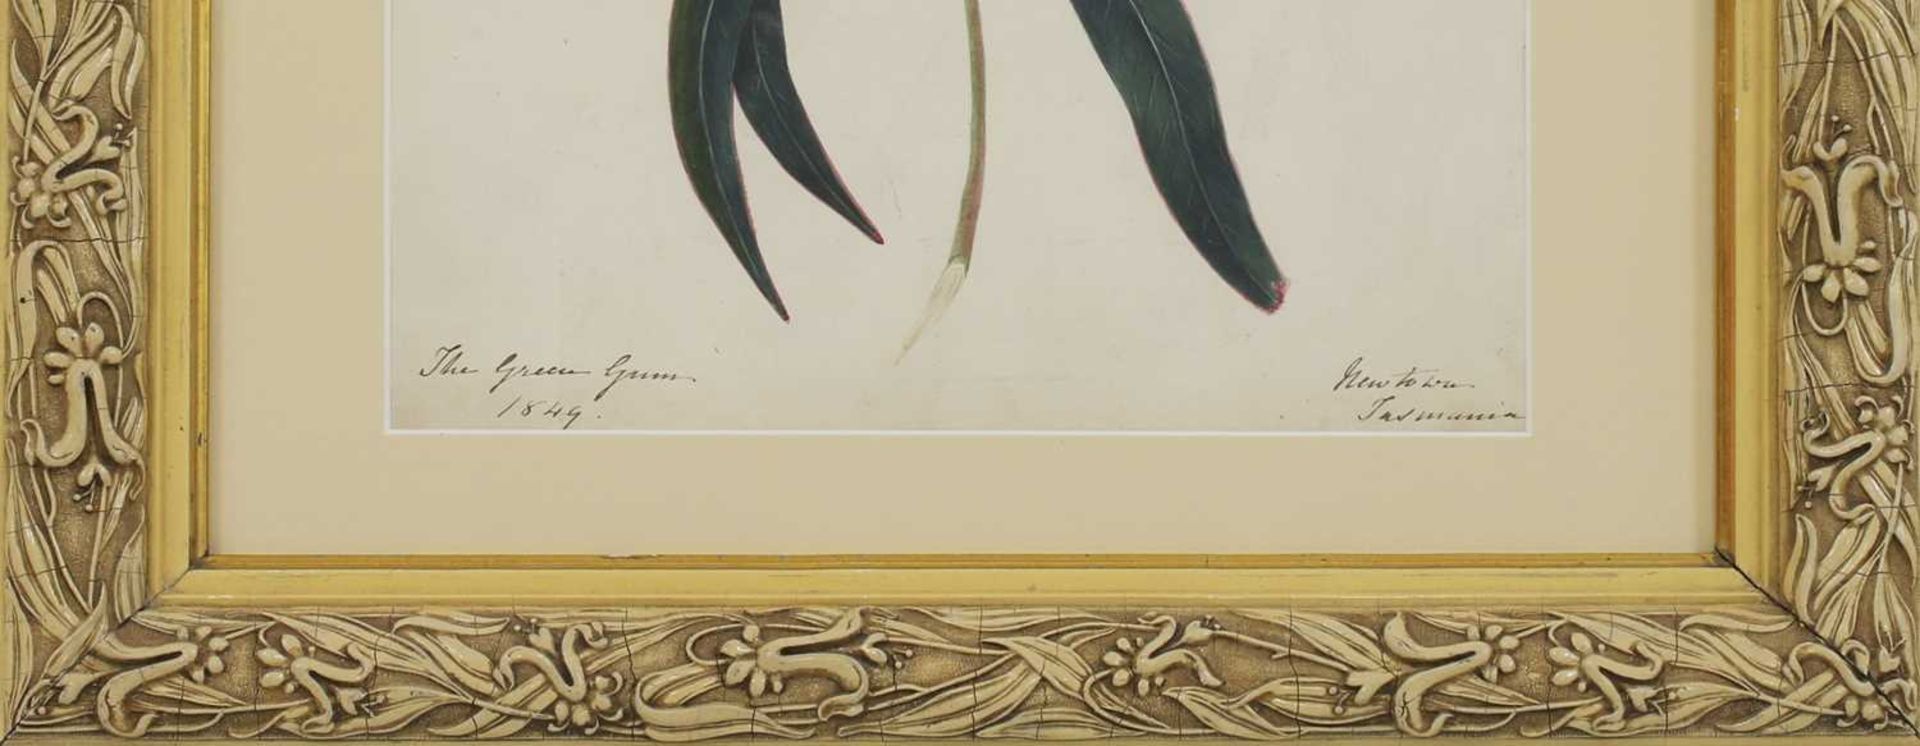 Attributed to William Buelow Gould (1803-1853) - Image 3 of 4